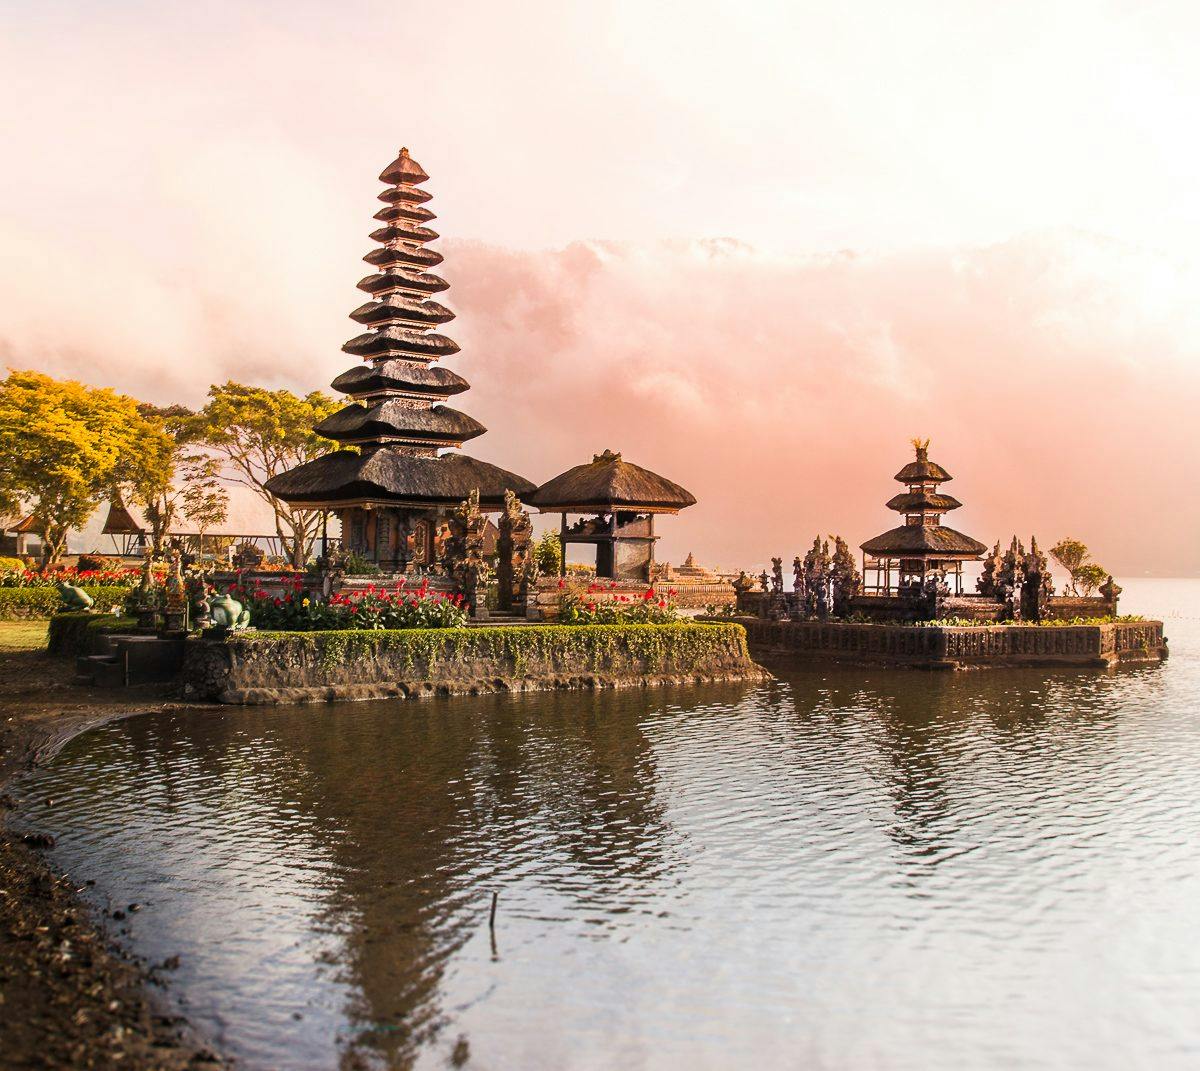 Image - Bali for First Timers: 21 Things to Know before You Go